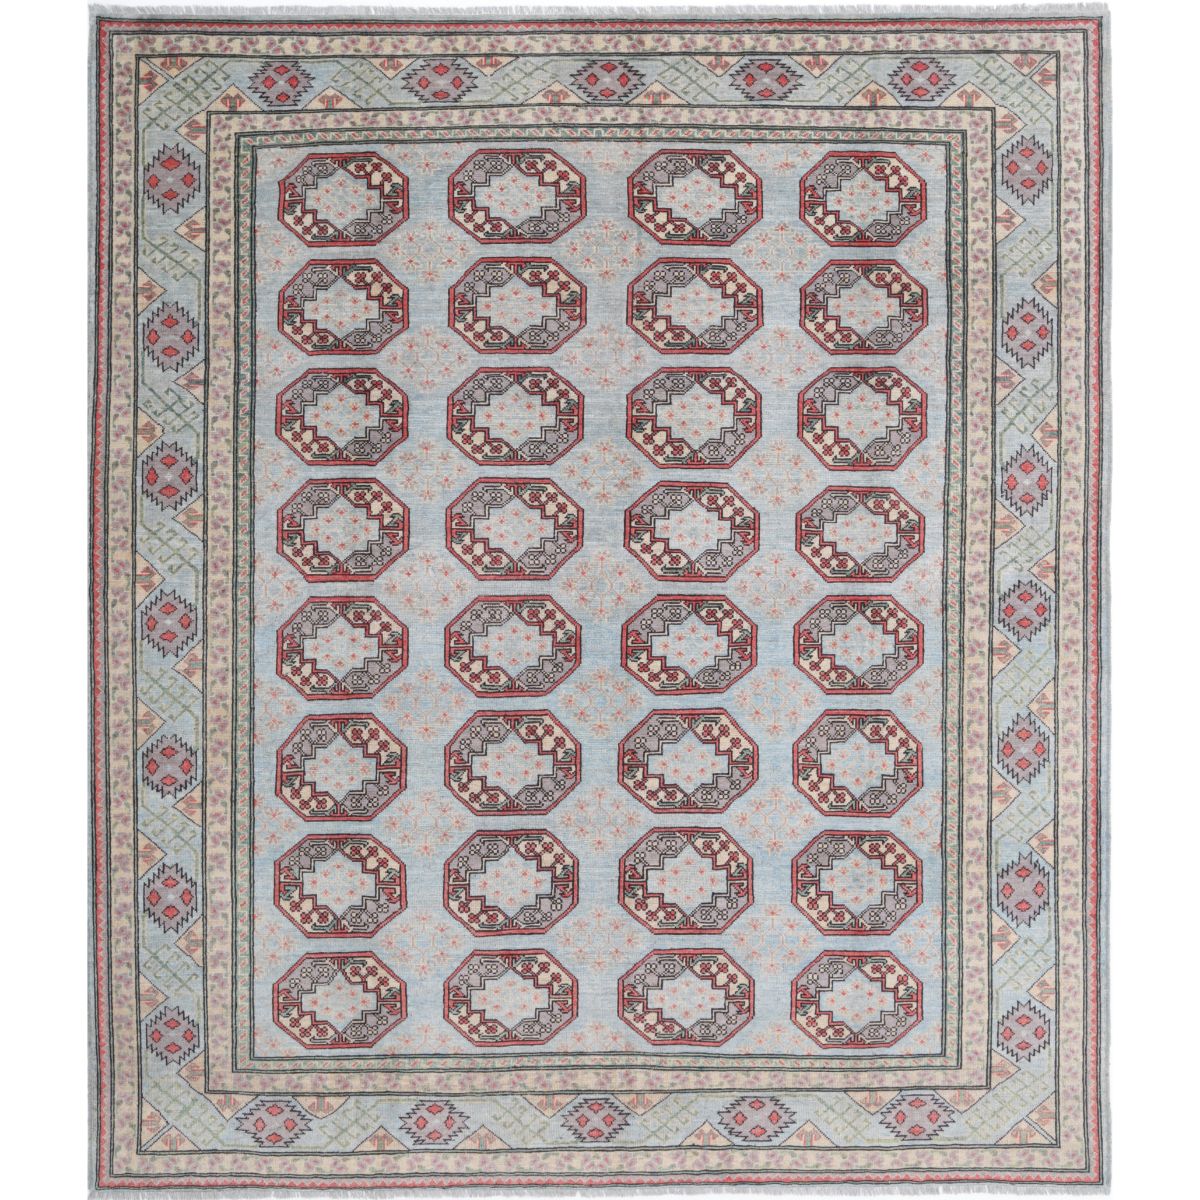 Revival 8' 5" X 9' 9" Wool Hand Knotted Rug